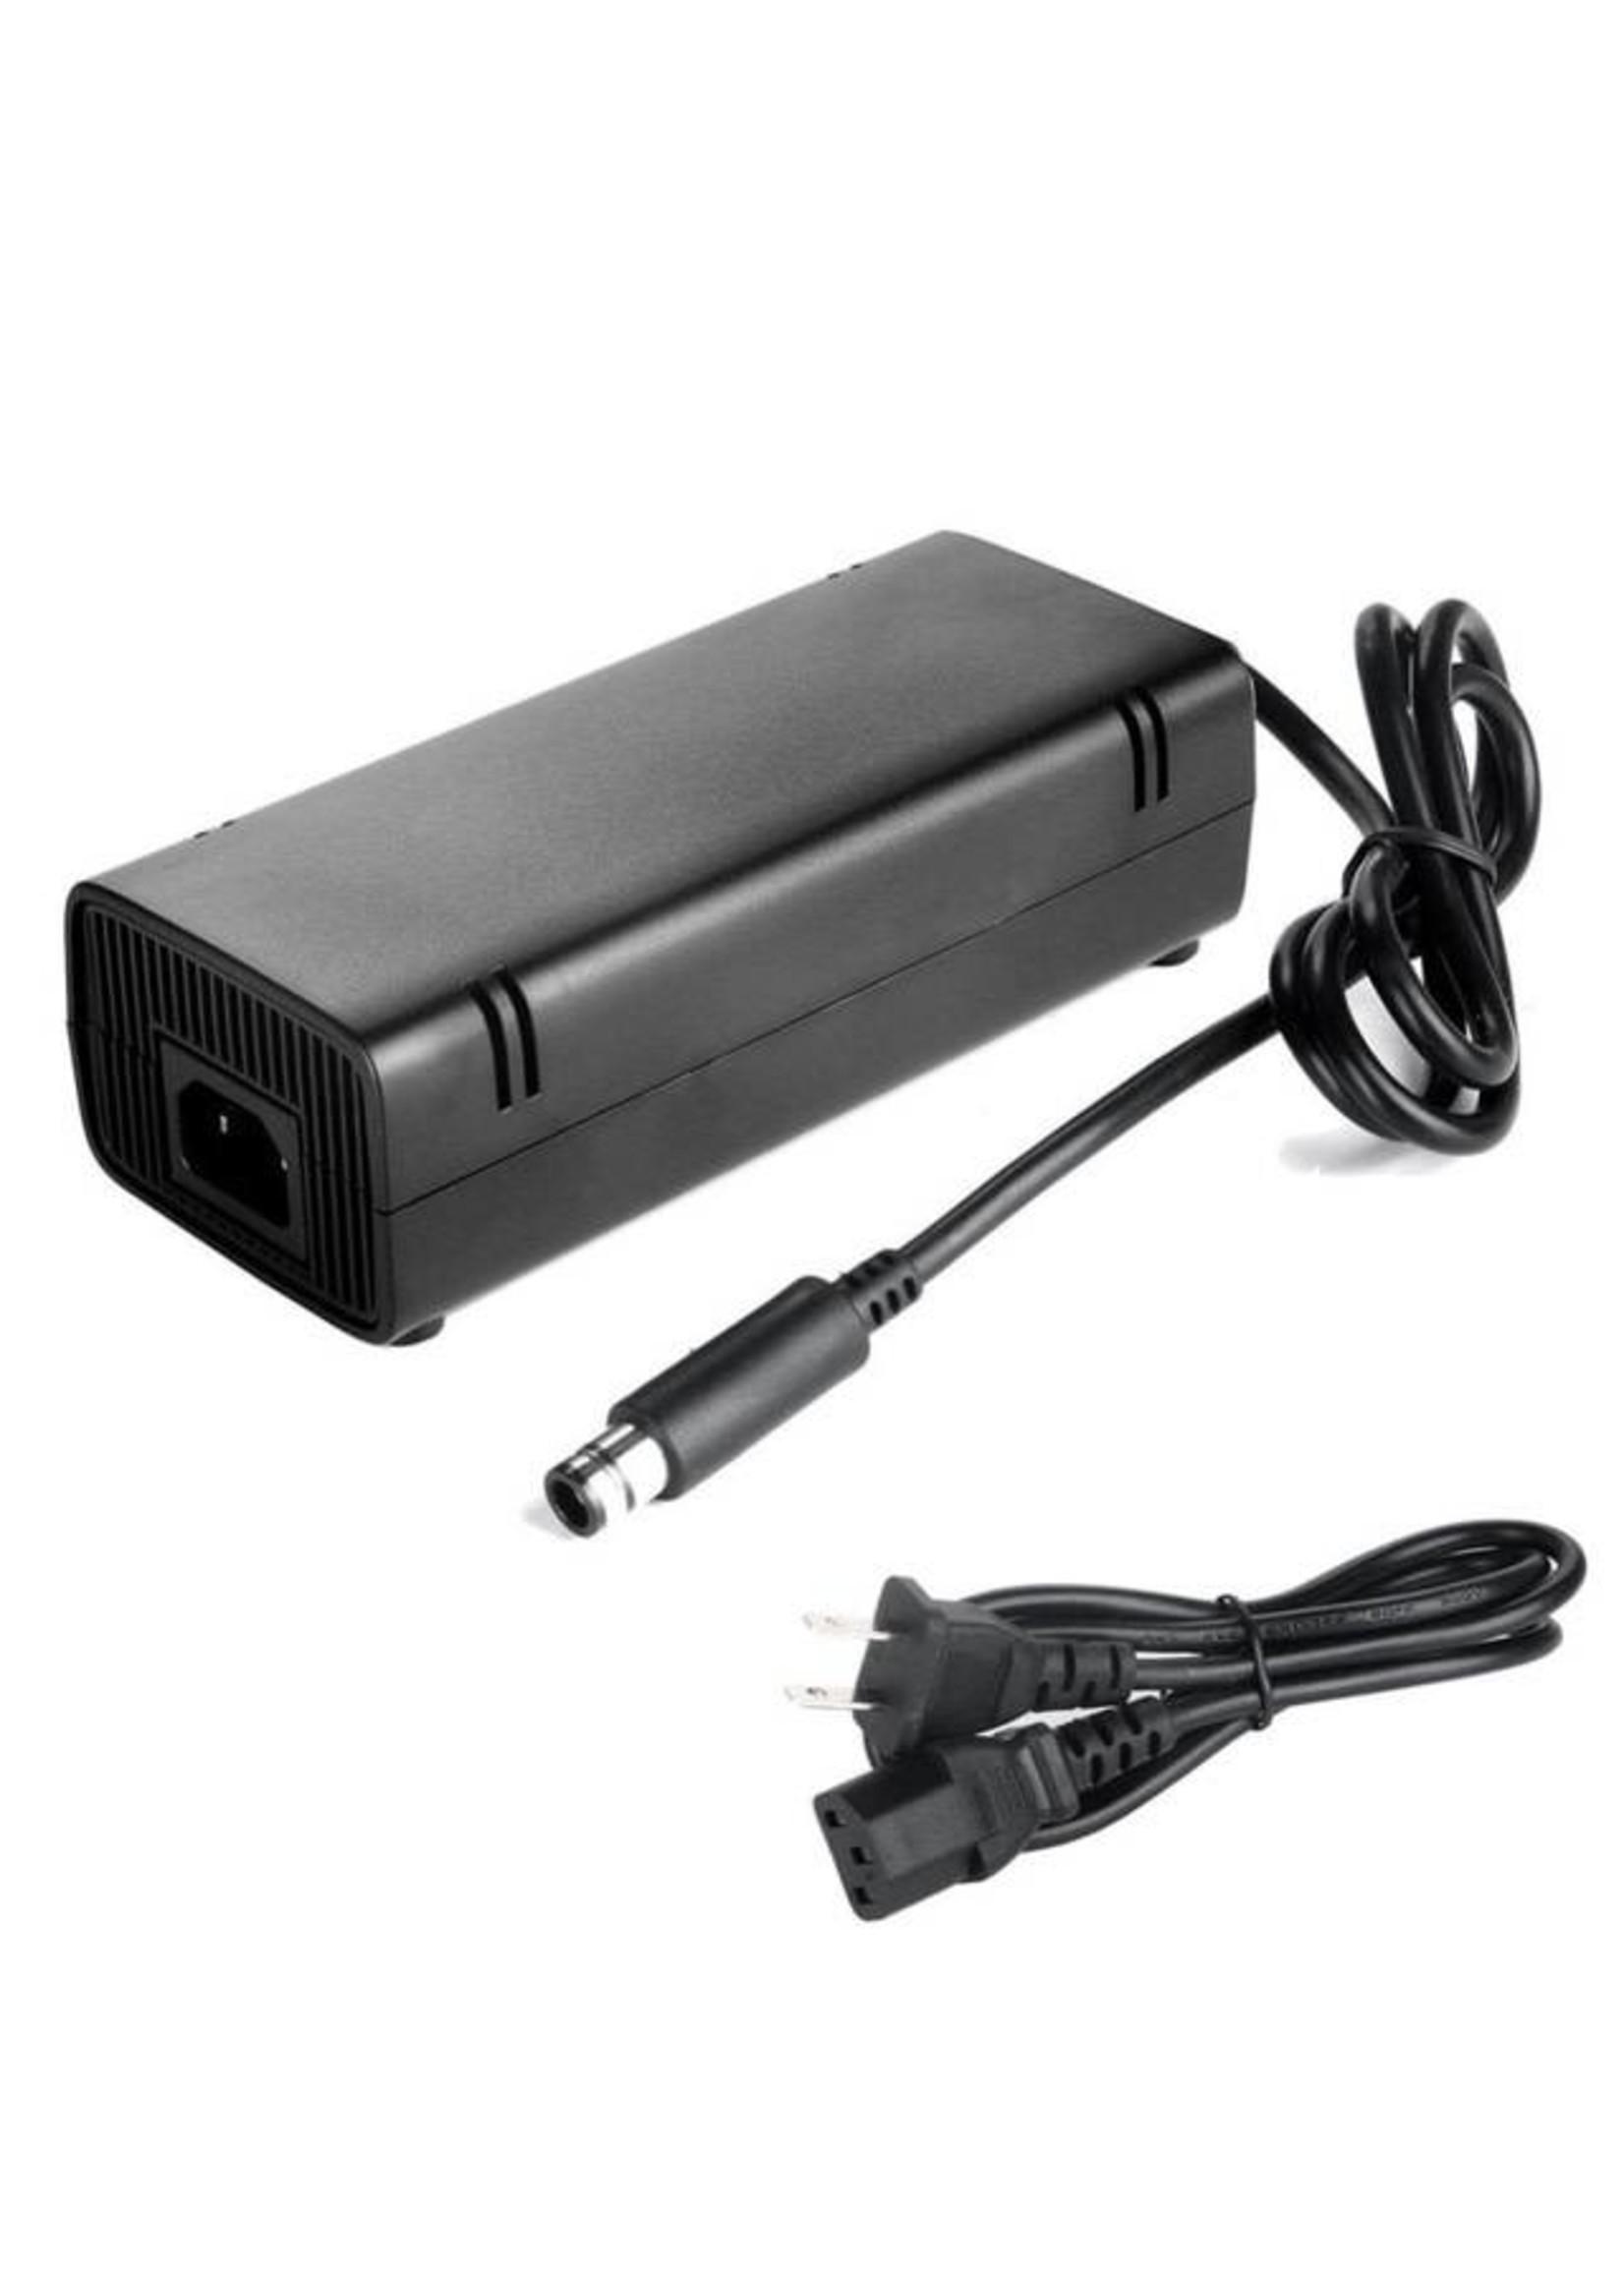 XBOX 360 AC Adapter (Old Model)